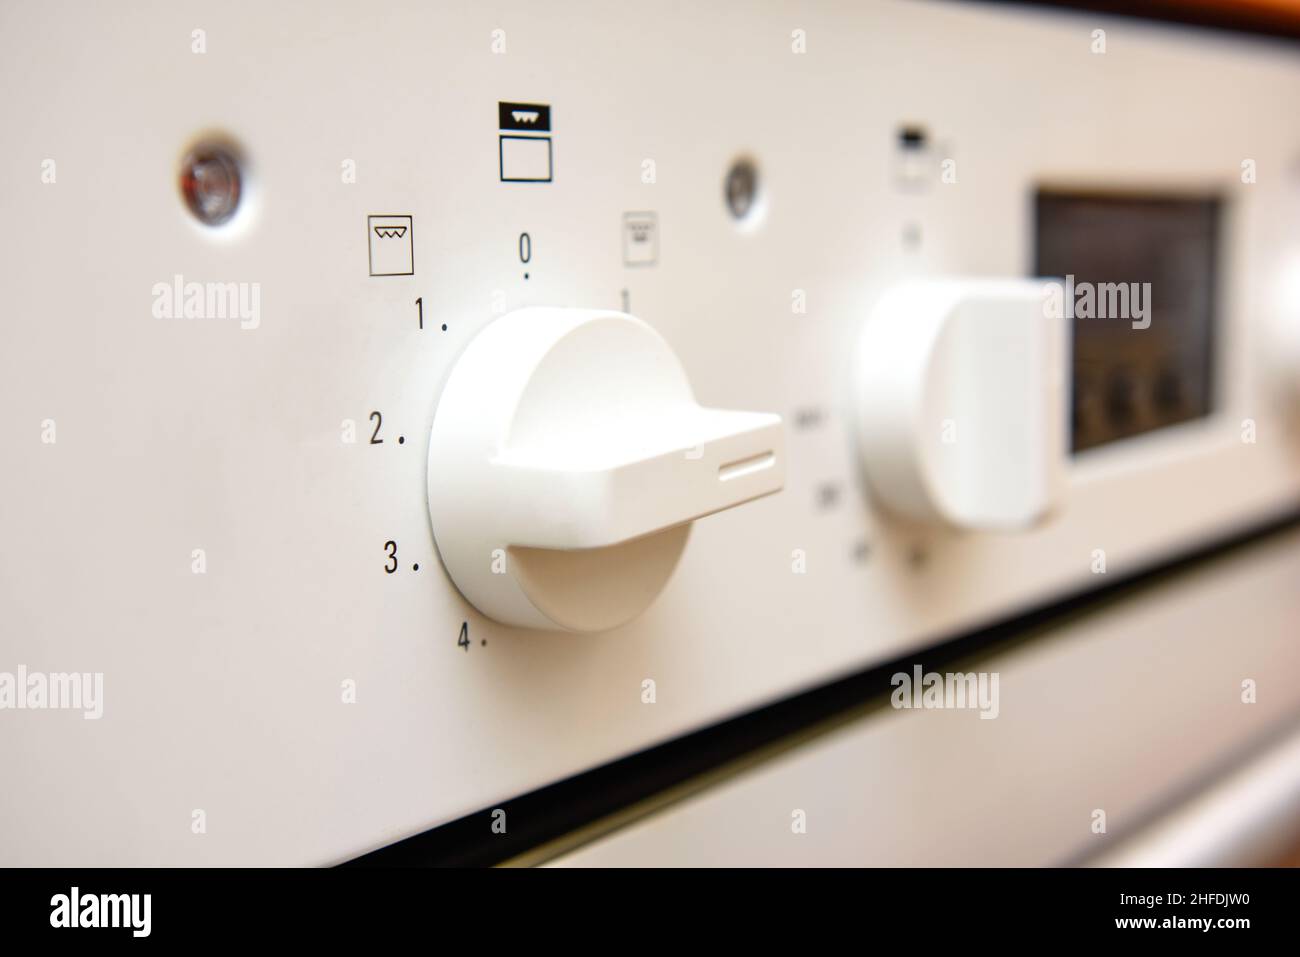 https://c8.alamy.com/comp/2HFDJW0/electric-oven-dial-close-up-on-the-switch-of-the-cooker-turned-up-hot-2HFDJW0.jpg